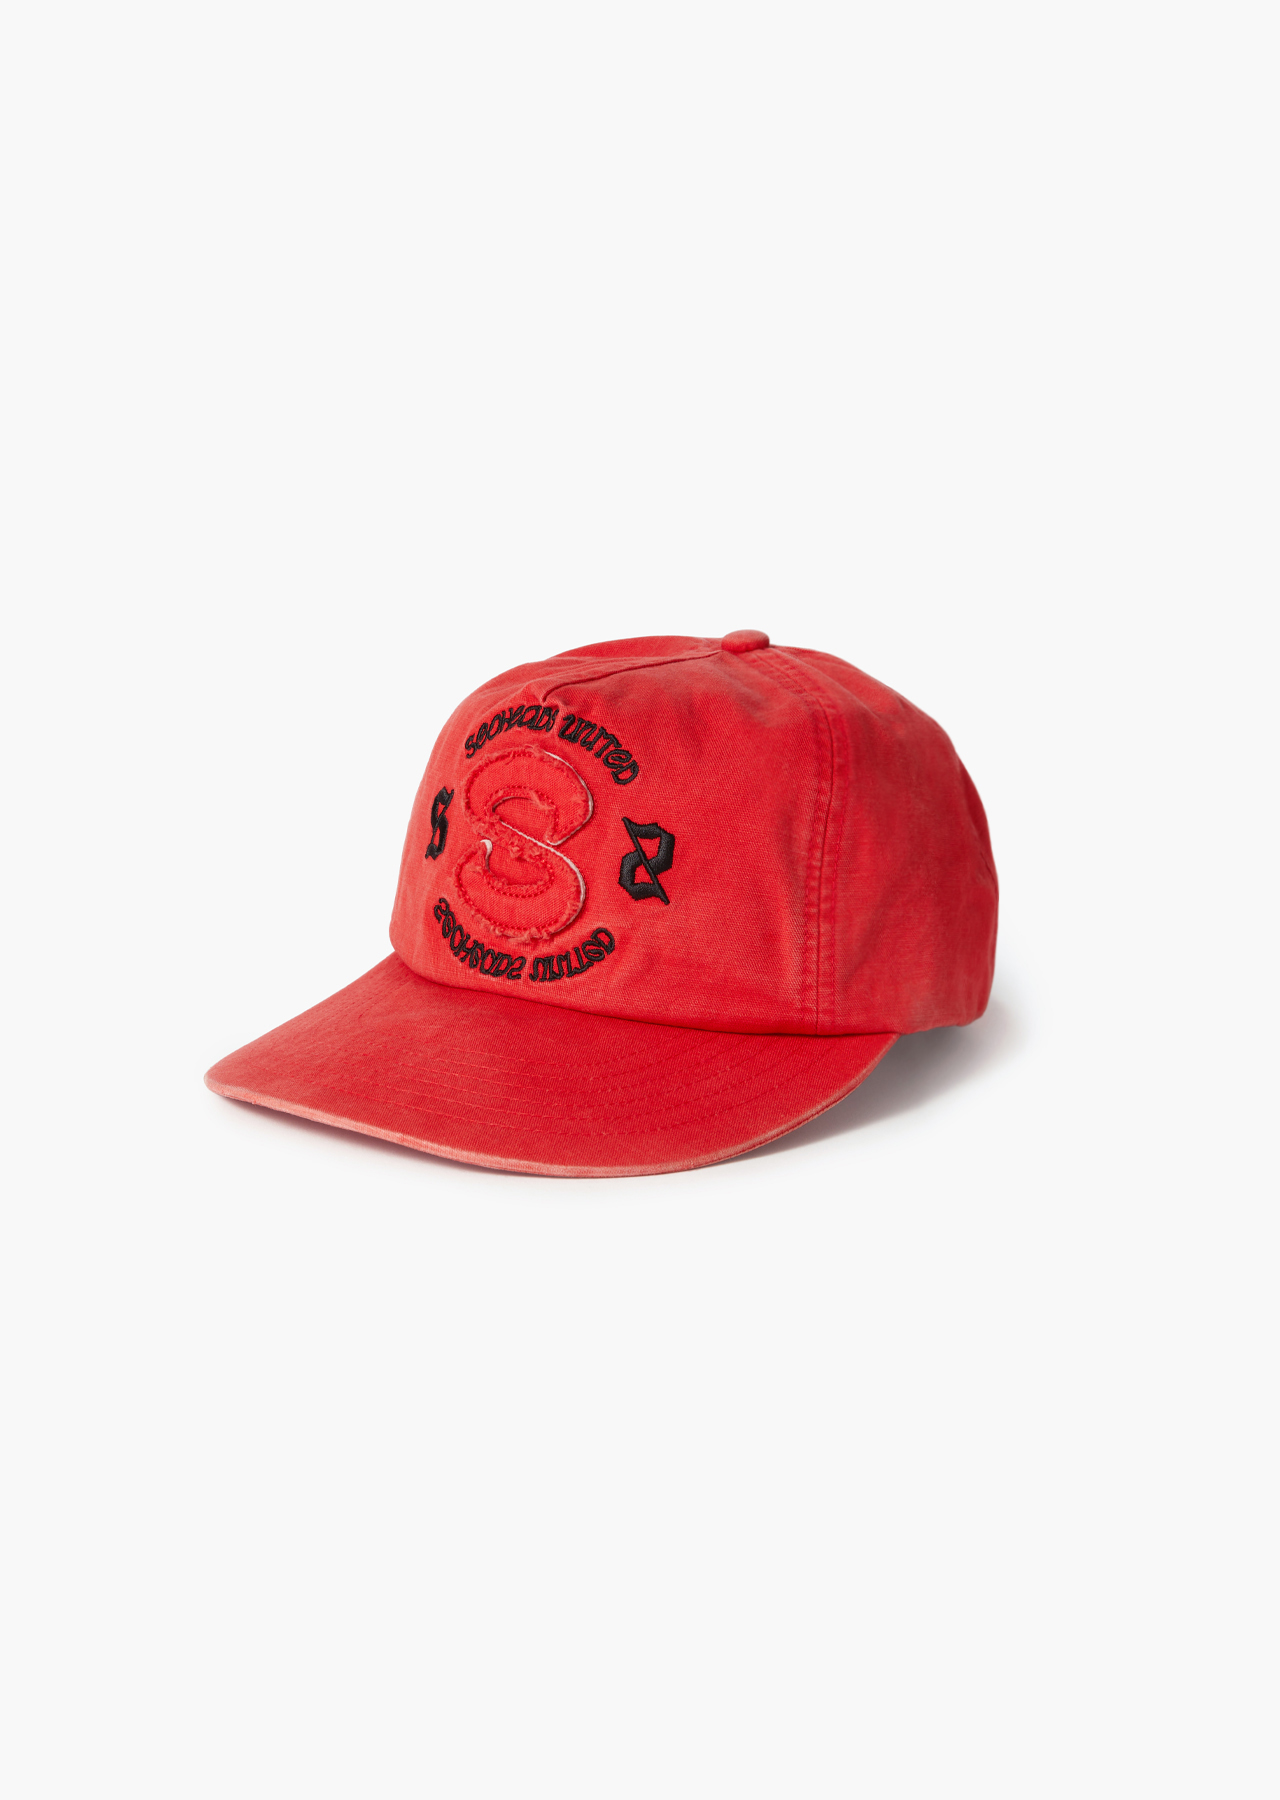 seoheads COTTON CAP RED